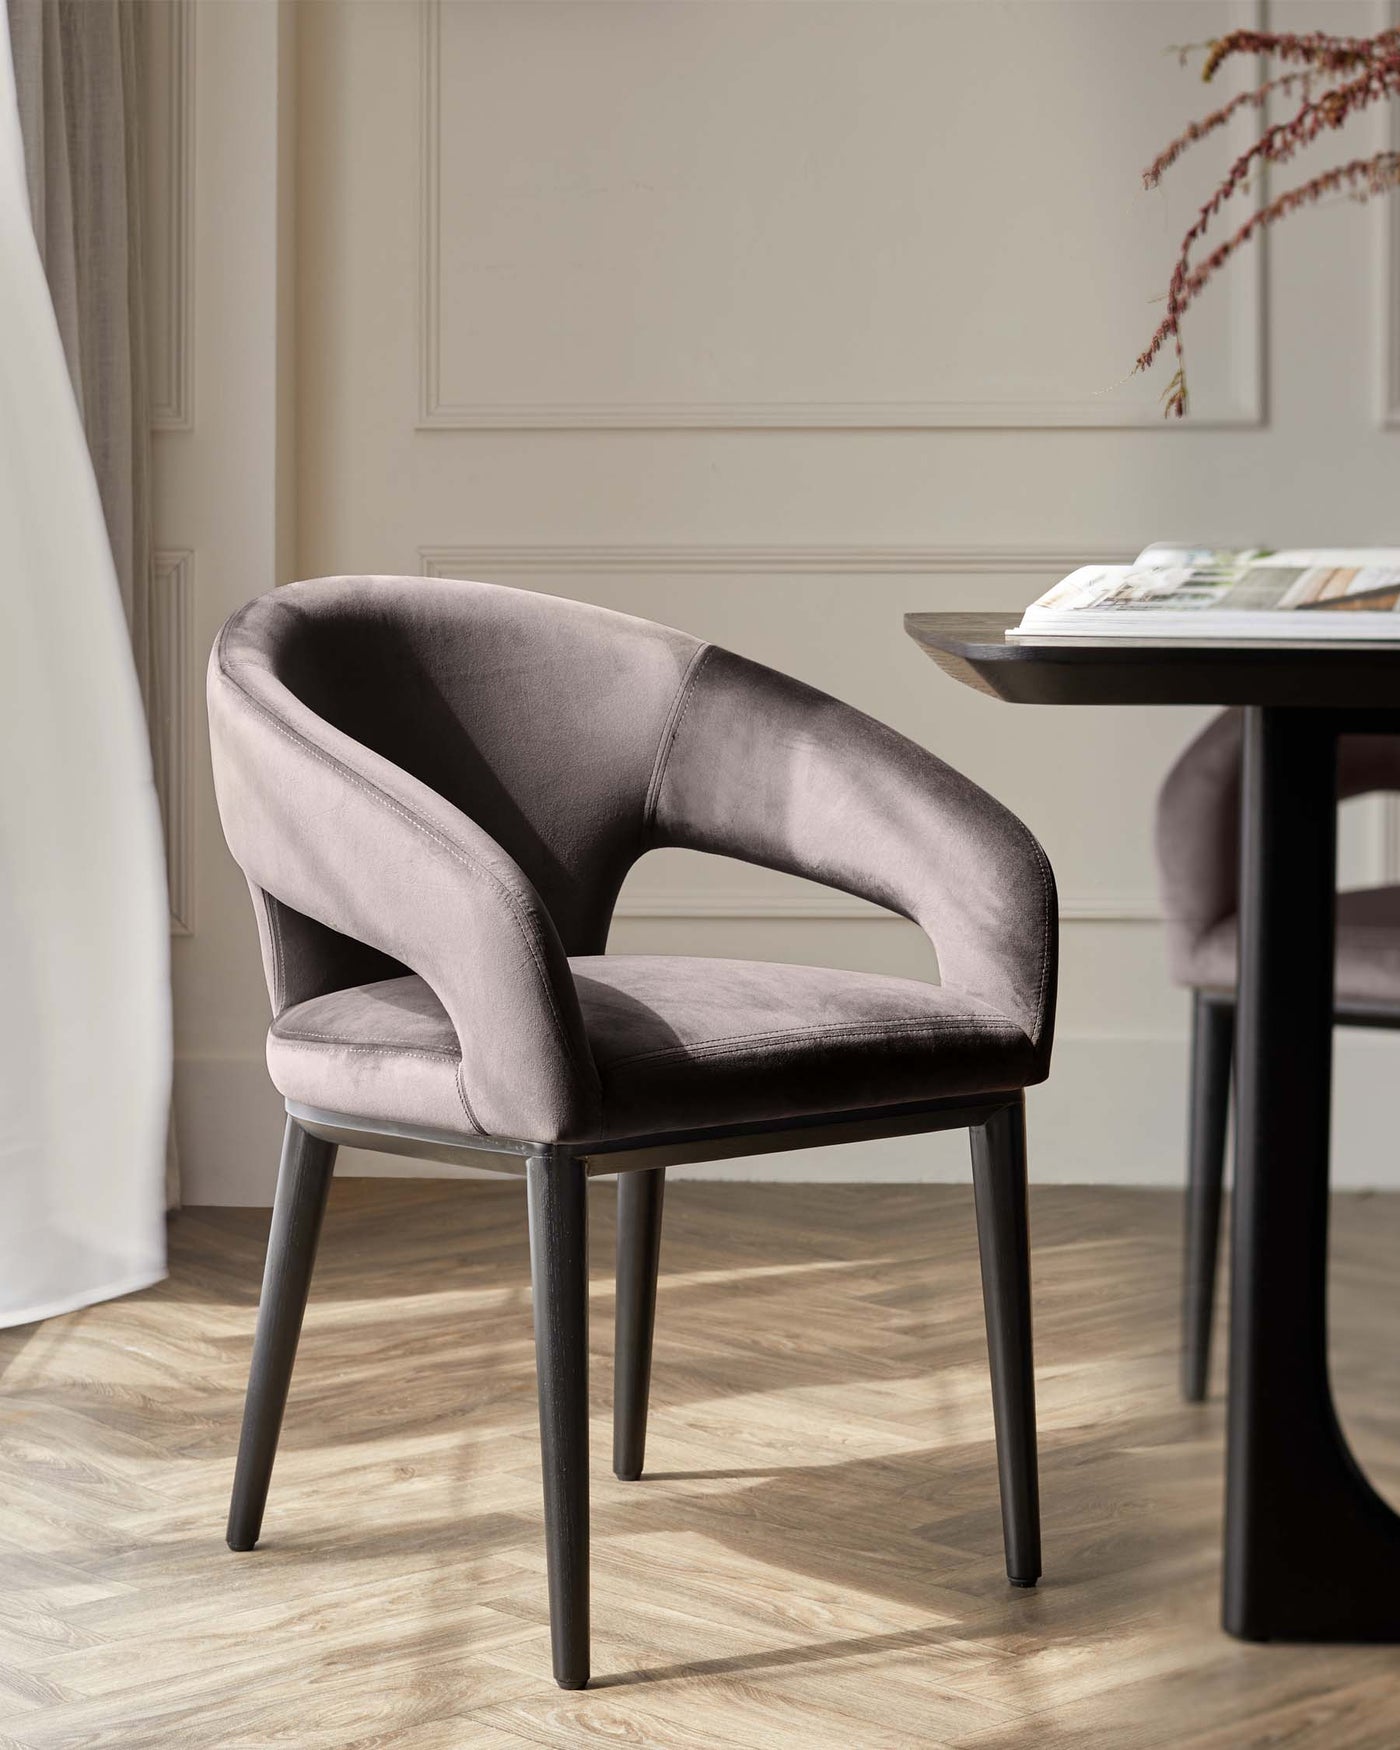 Elegant modern dining chair with a curved backrest and plush mauve velvet upholstery, featuring a sleek black frame with four straight legs.